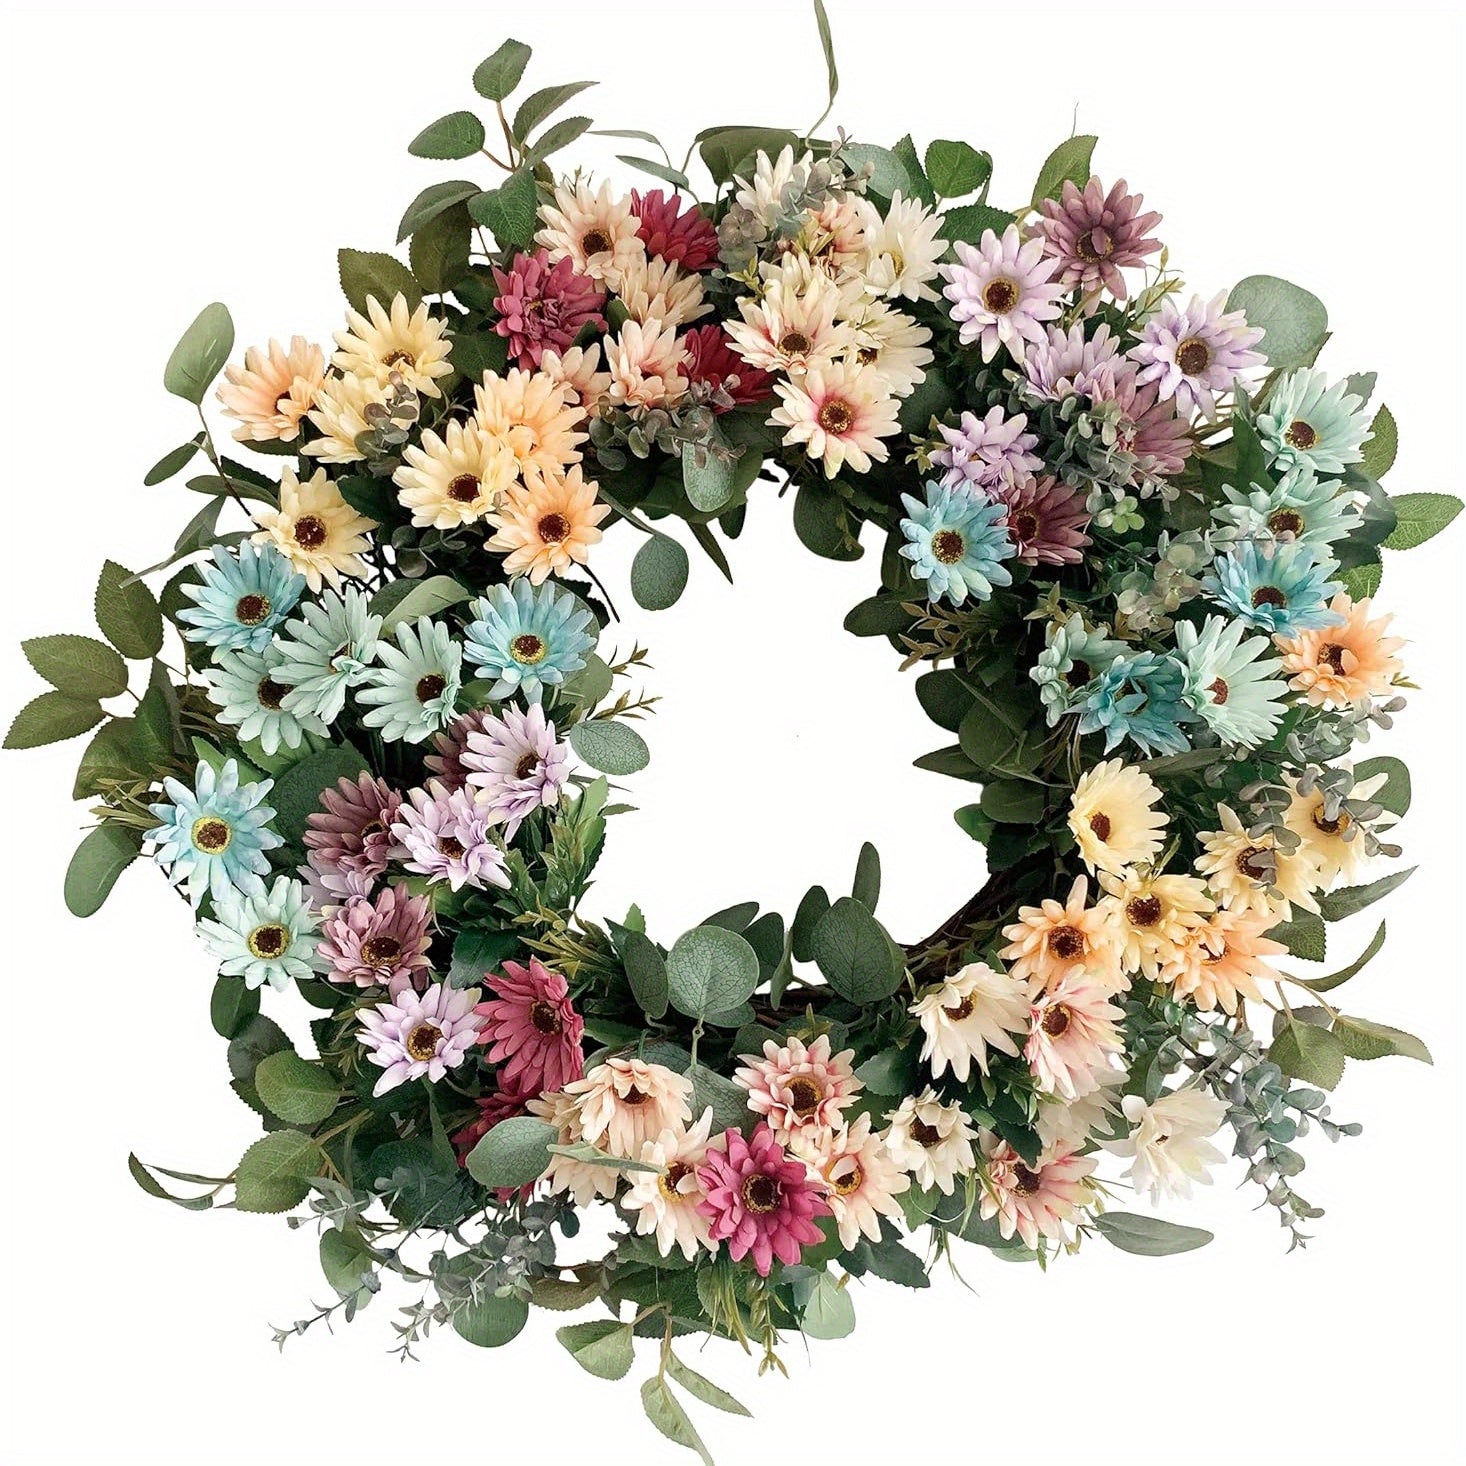 24 Inch Summer Front Door Wreath Artificial Cosmos Daisy Flower Wreath Colorful Blossom Foliage Wreath Spring Wreaths for Front Door on Grapevine Base for Festival Celebration Window Home Decor